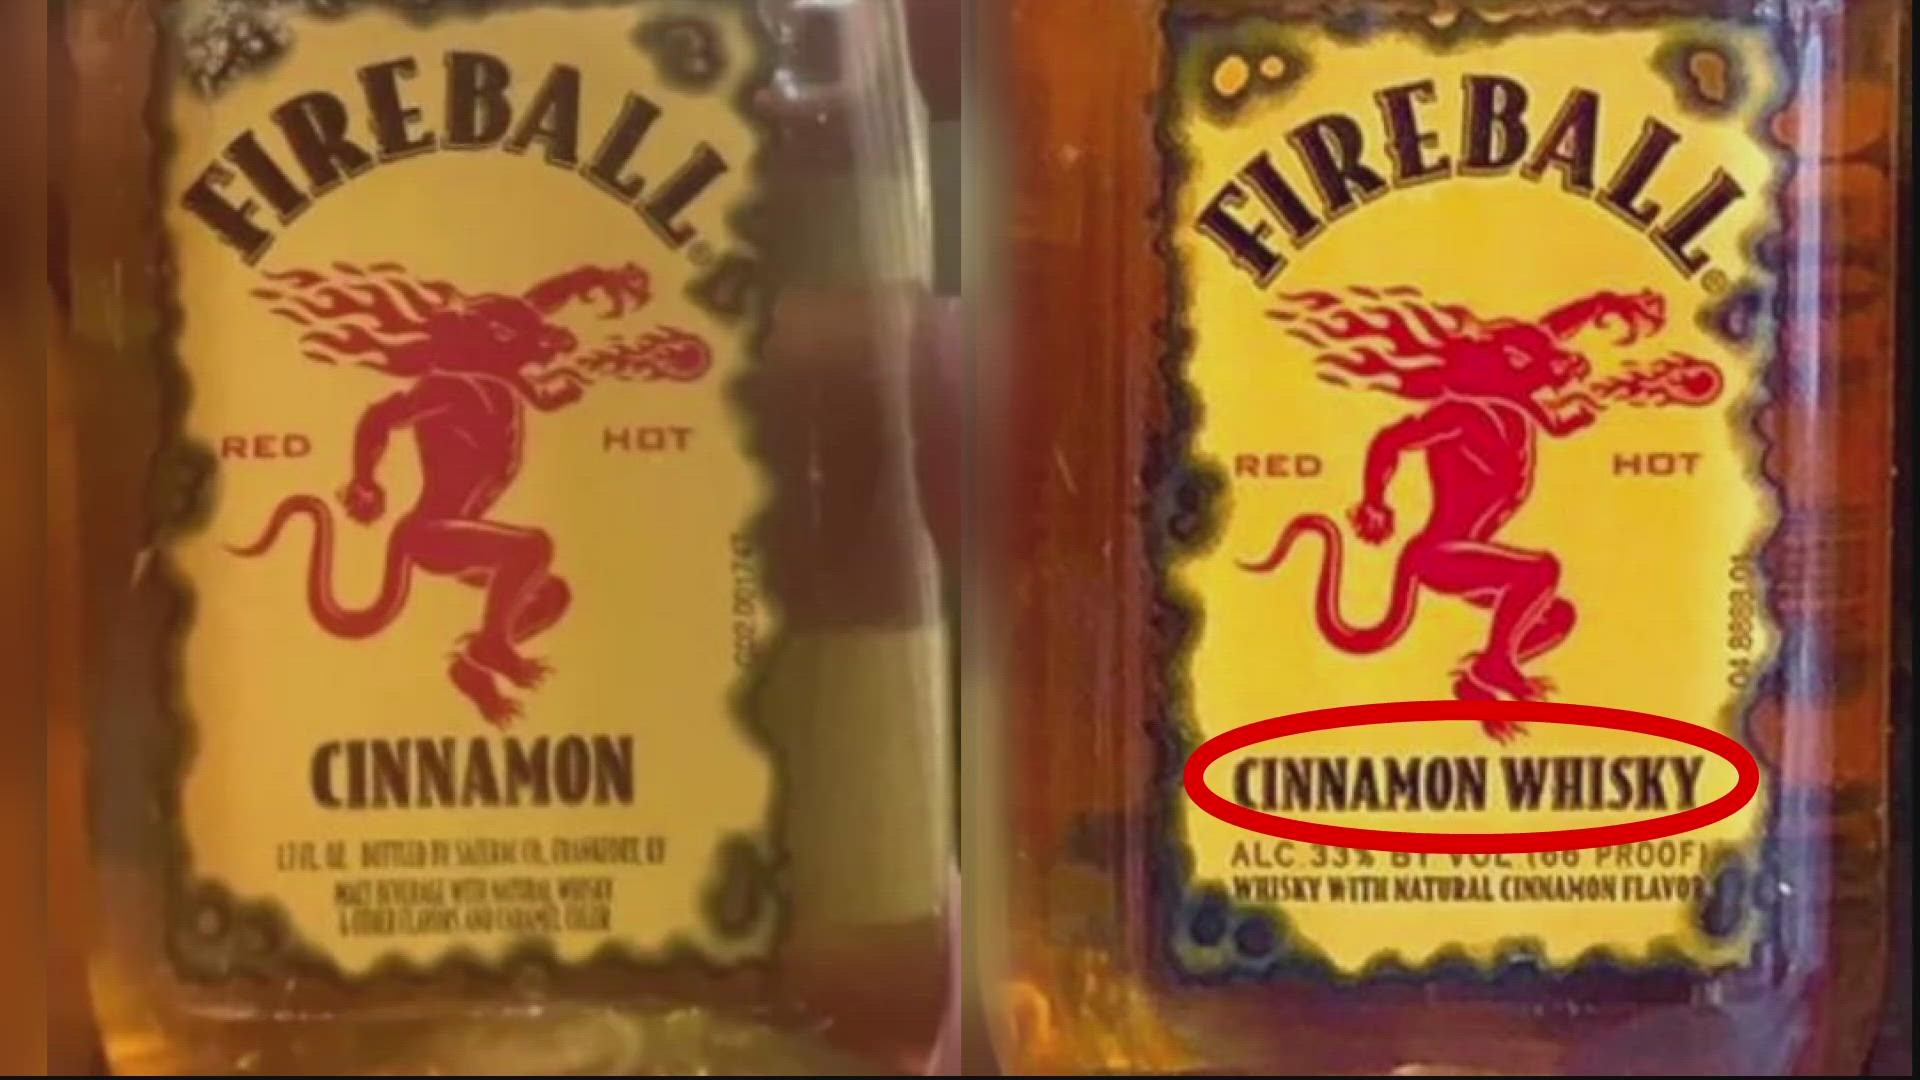 The company that makes Fireball is under fire tonight. A woman in Illinois filed a lawsuit claiming the company's popular Fireball Cinnamon shooters don't actually